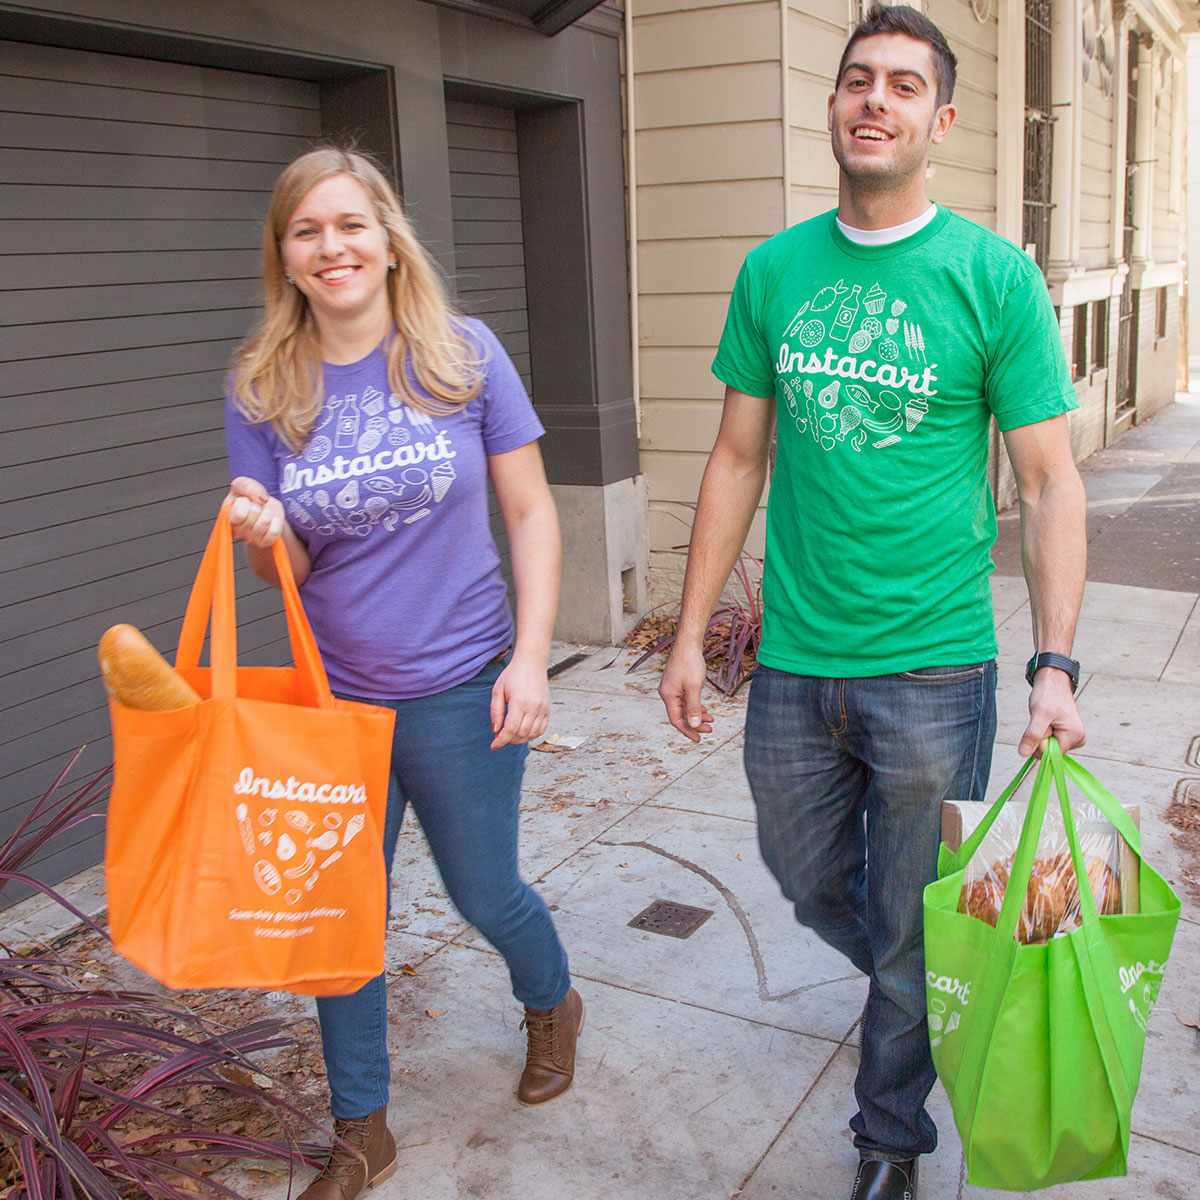 Whole Foods delivery service expanded